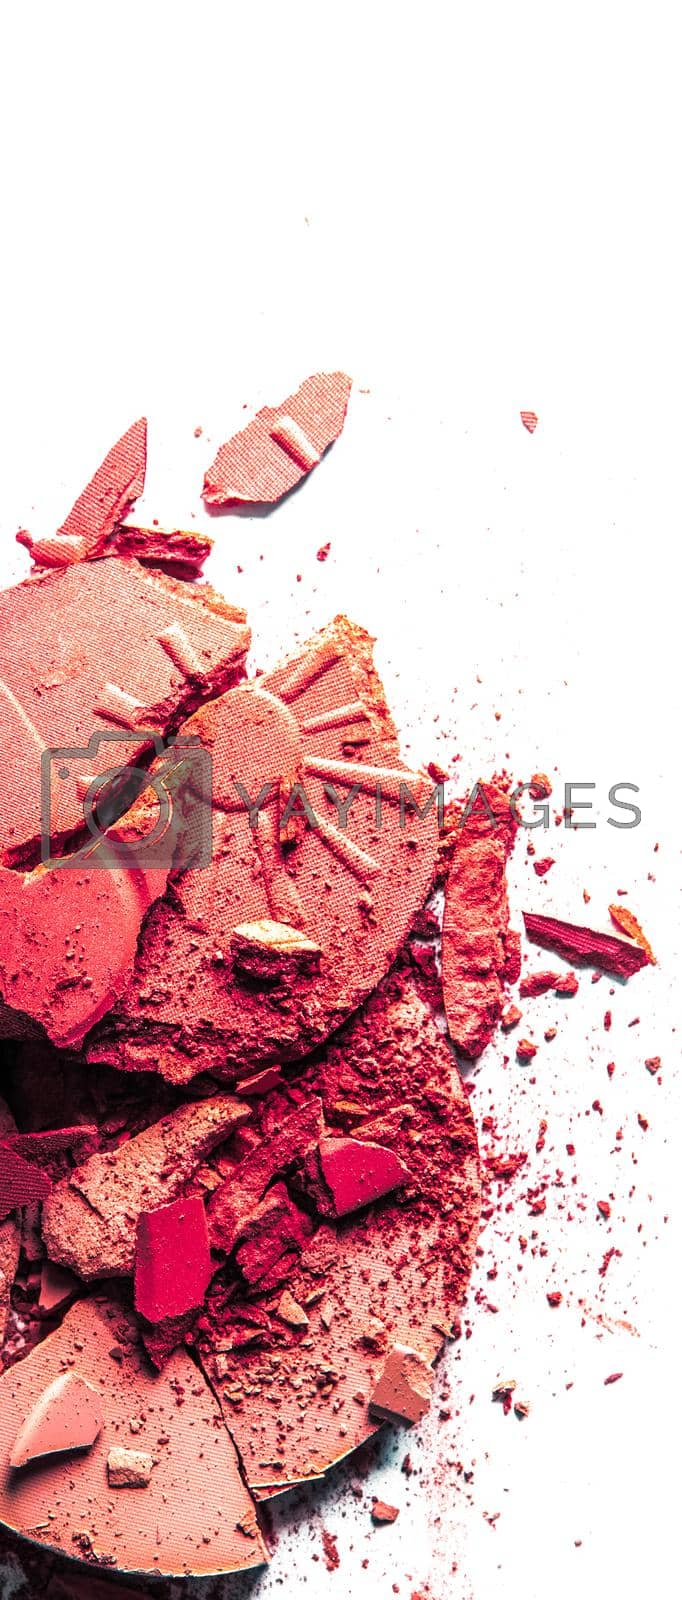 Royalty free image of Crushed eyeshadows and powder isolated on white background by Anneleven